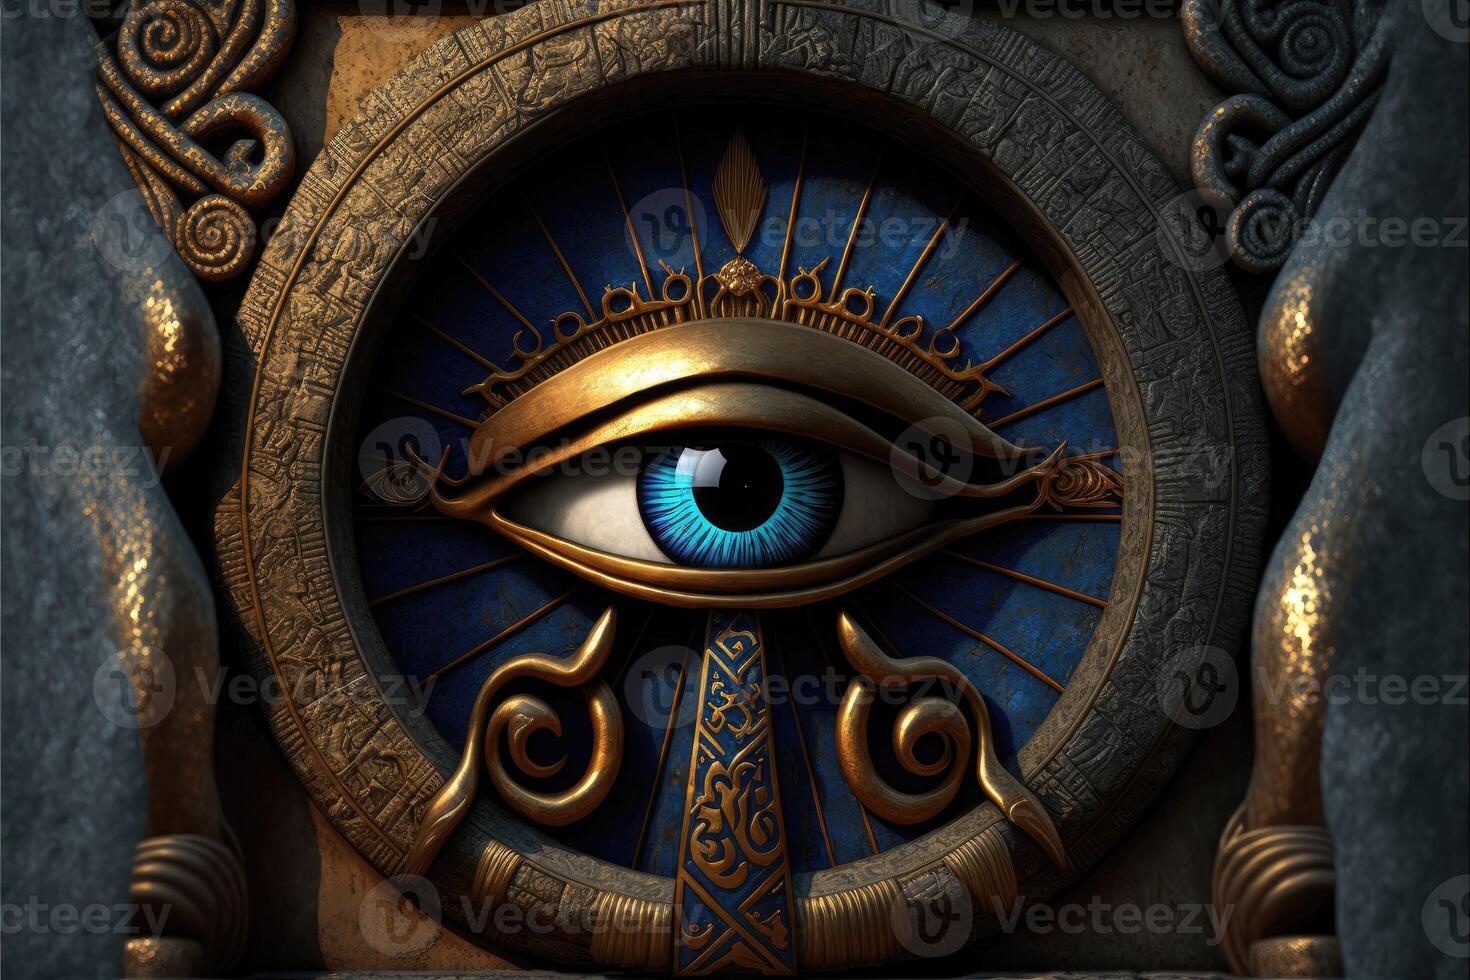 Eye of Horus, wedjat eye or udjat eye at the entrance to the temple of the Pharaohs abstract background. photo